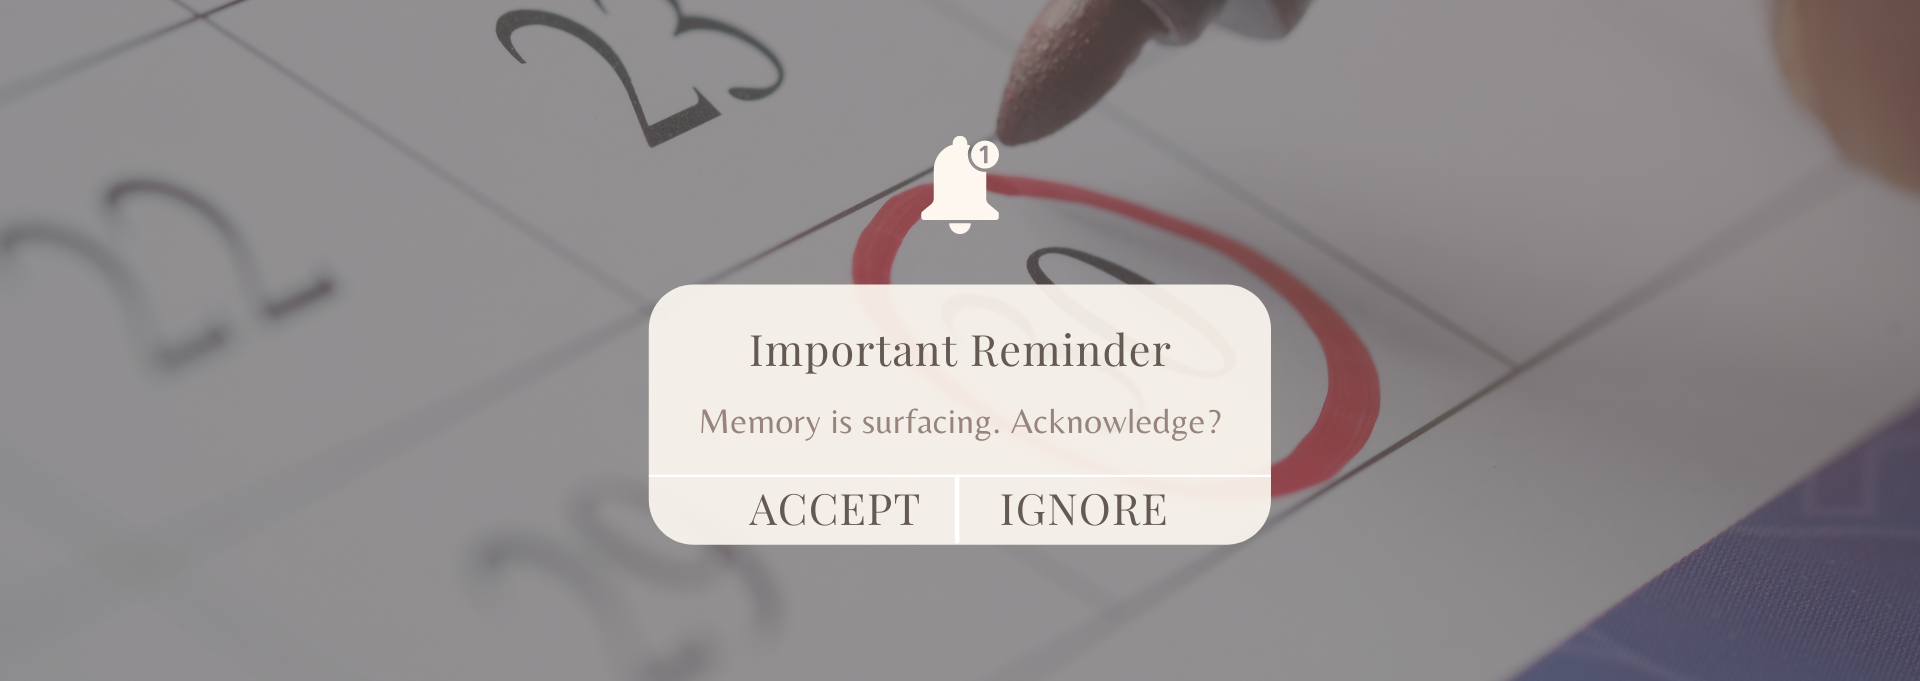 image of calendar with a date circled, and a pop up reminder saying "memory surfacing, acknowledge?" with two buttons to accept or ignore.